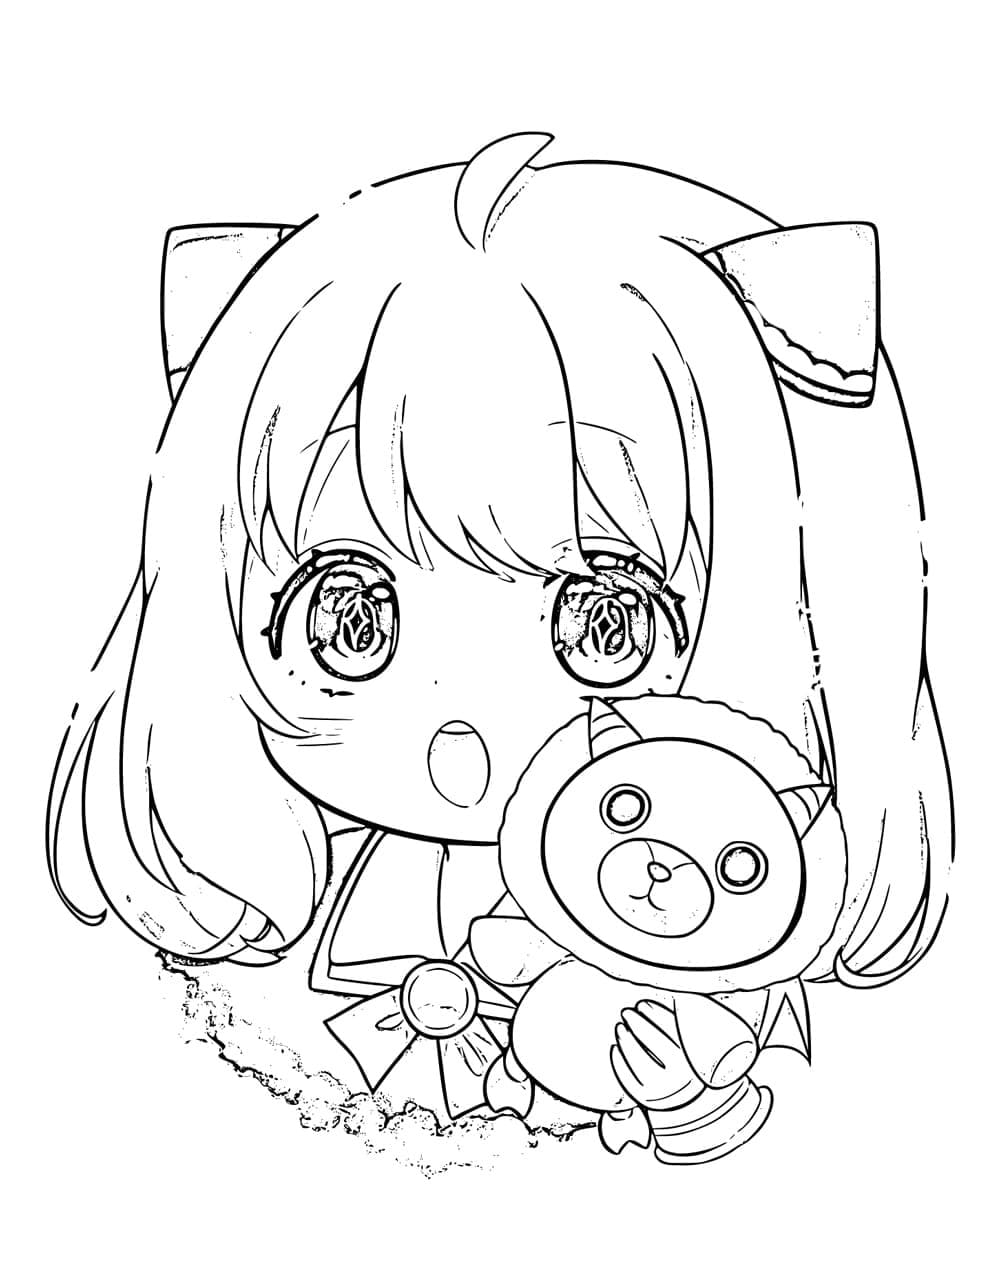 Chibi Anya Forger Coloring Page - Anime Coloring Pages